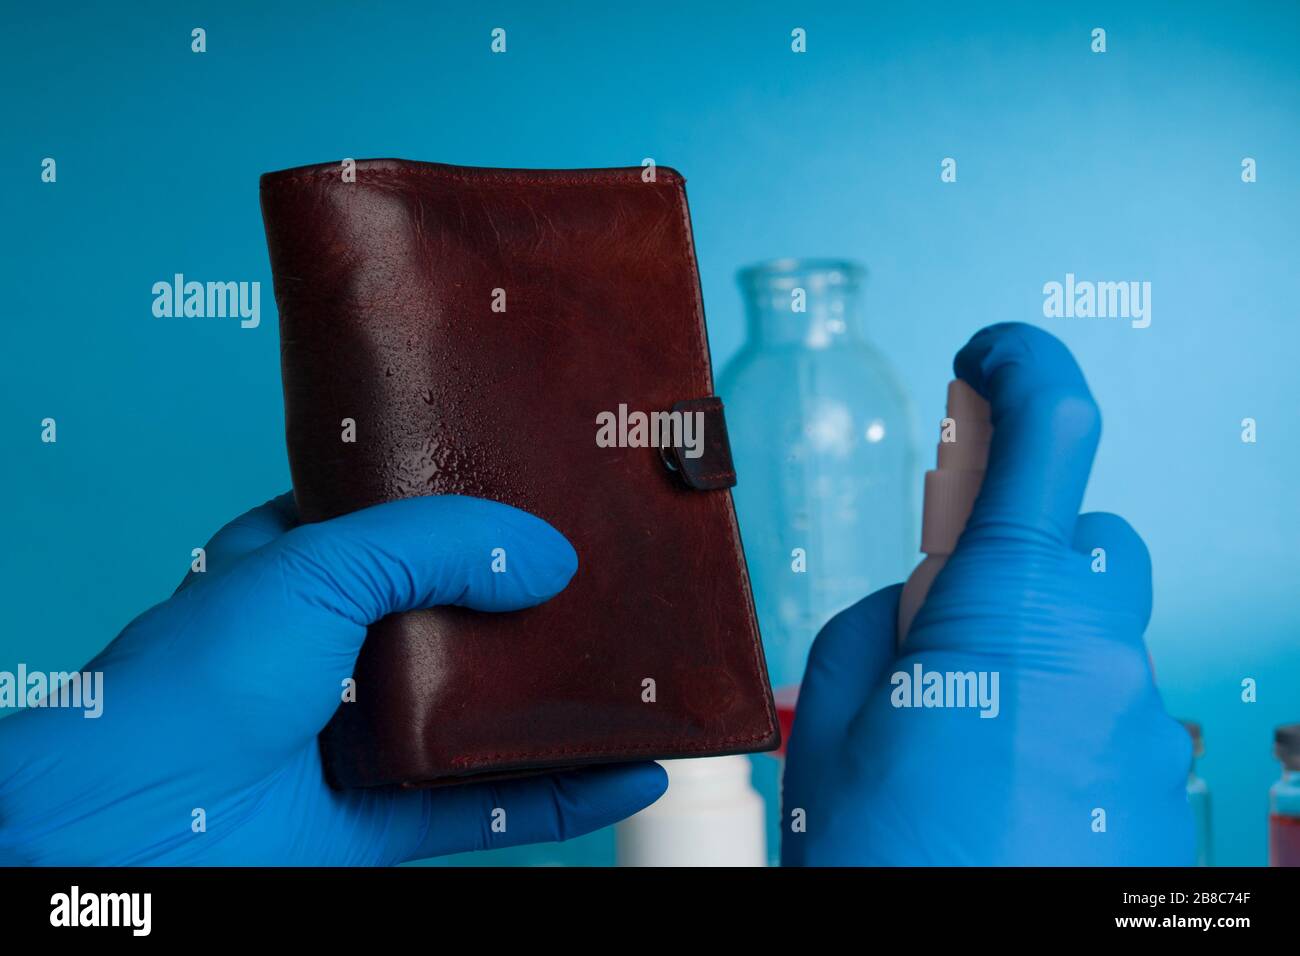 Concept of Cleaning personal belongings for disease prevention from Coronavirus. cleaning leather wallet with antiseptic spray Stock Photo